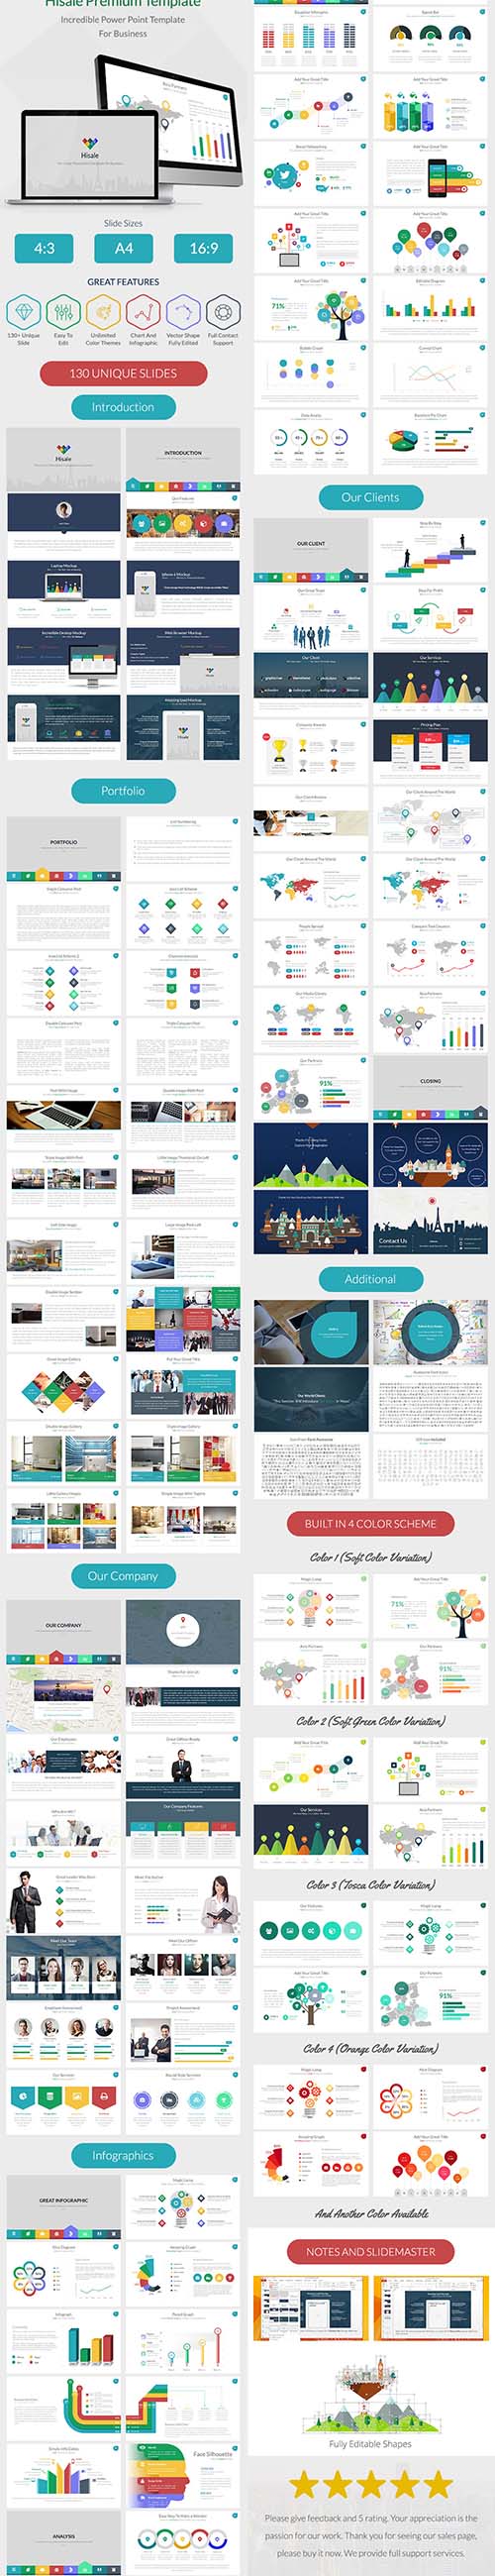 GraphicRiver - Hisale - Multipurpose Powerpoint Template 10827235